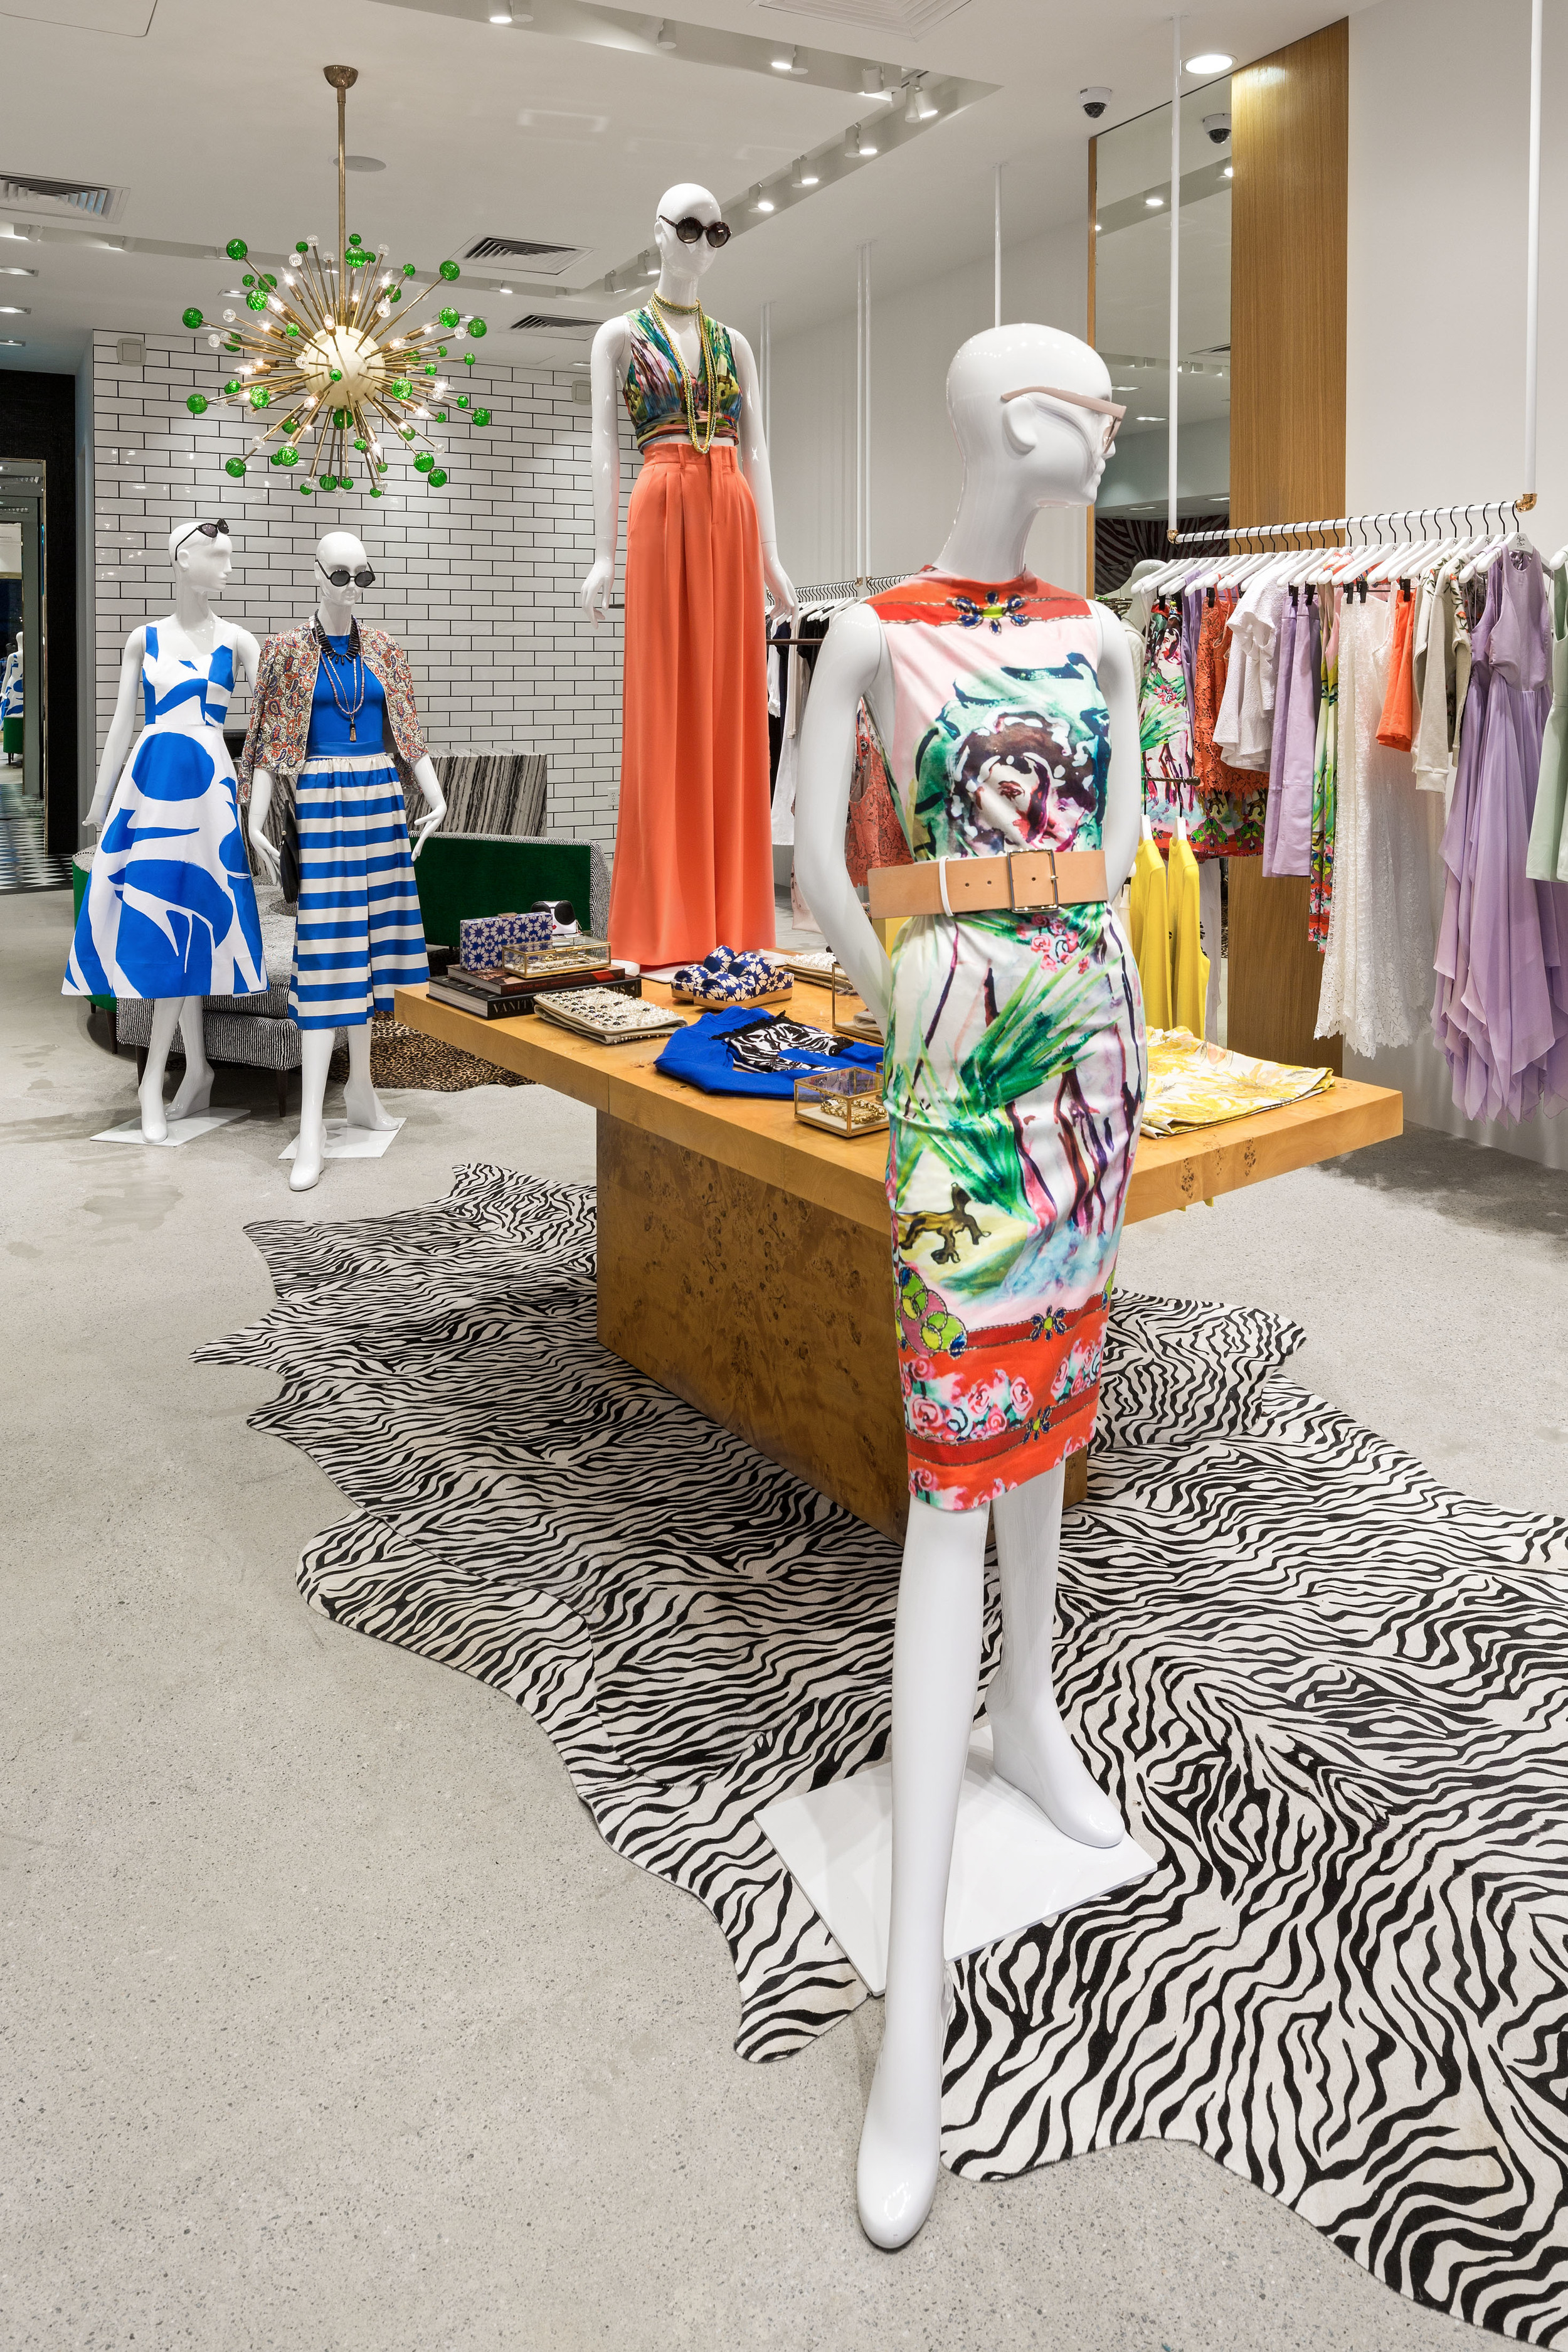 ALICE + OLIVIA BY STACEY BENDET NOW OPEN IN BUCKHEAD ATLANTA — Fashion